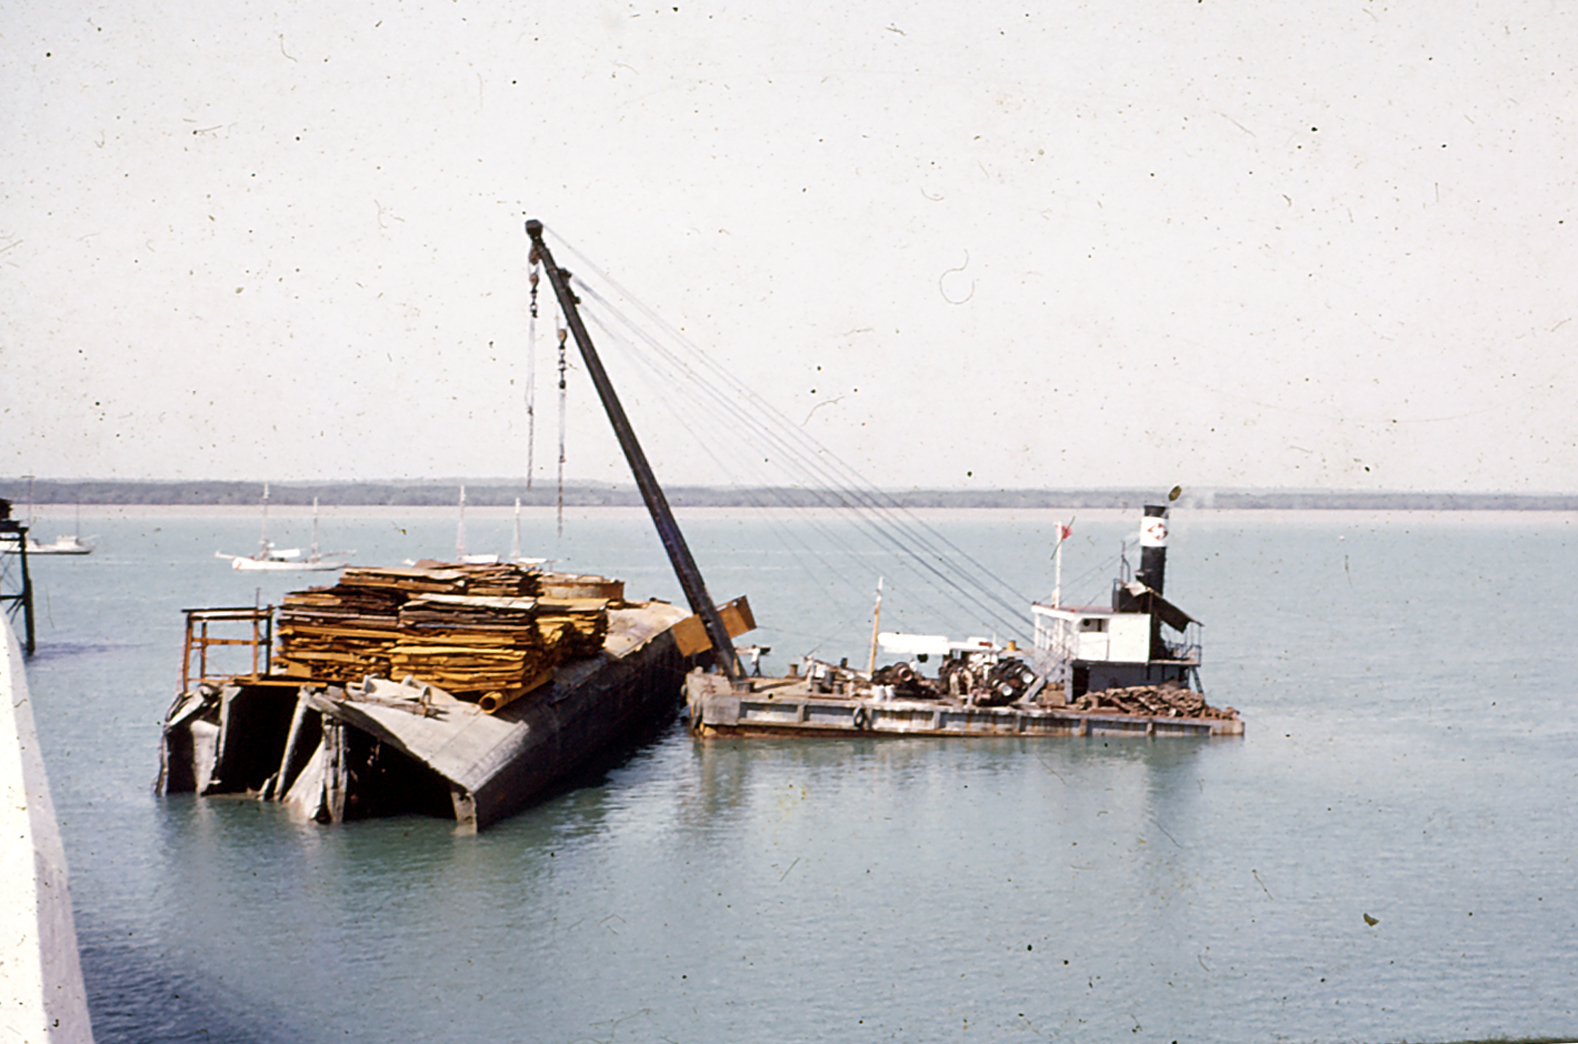 a crane on top of a barge in the water